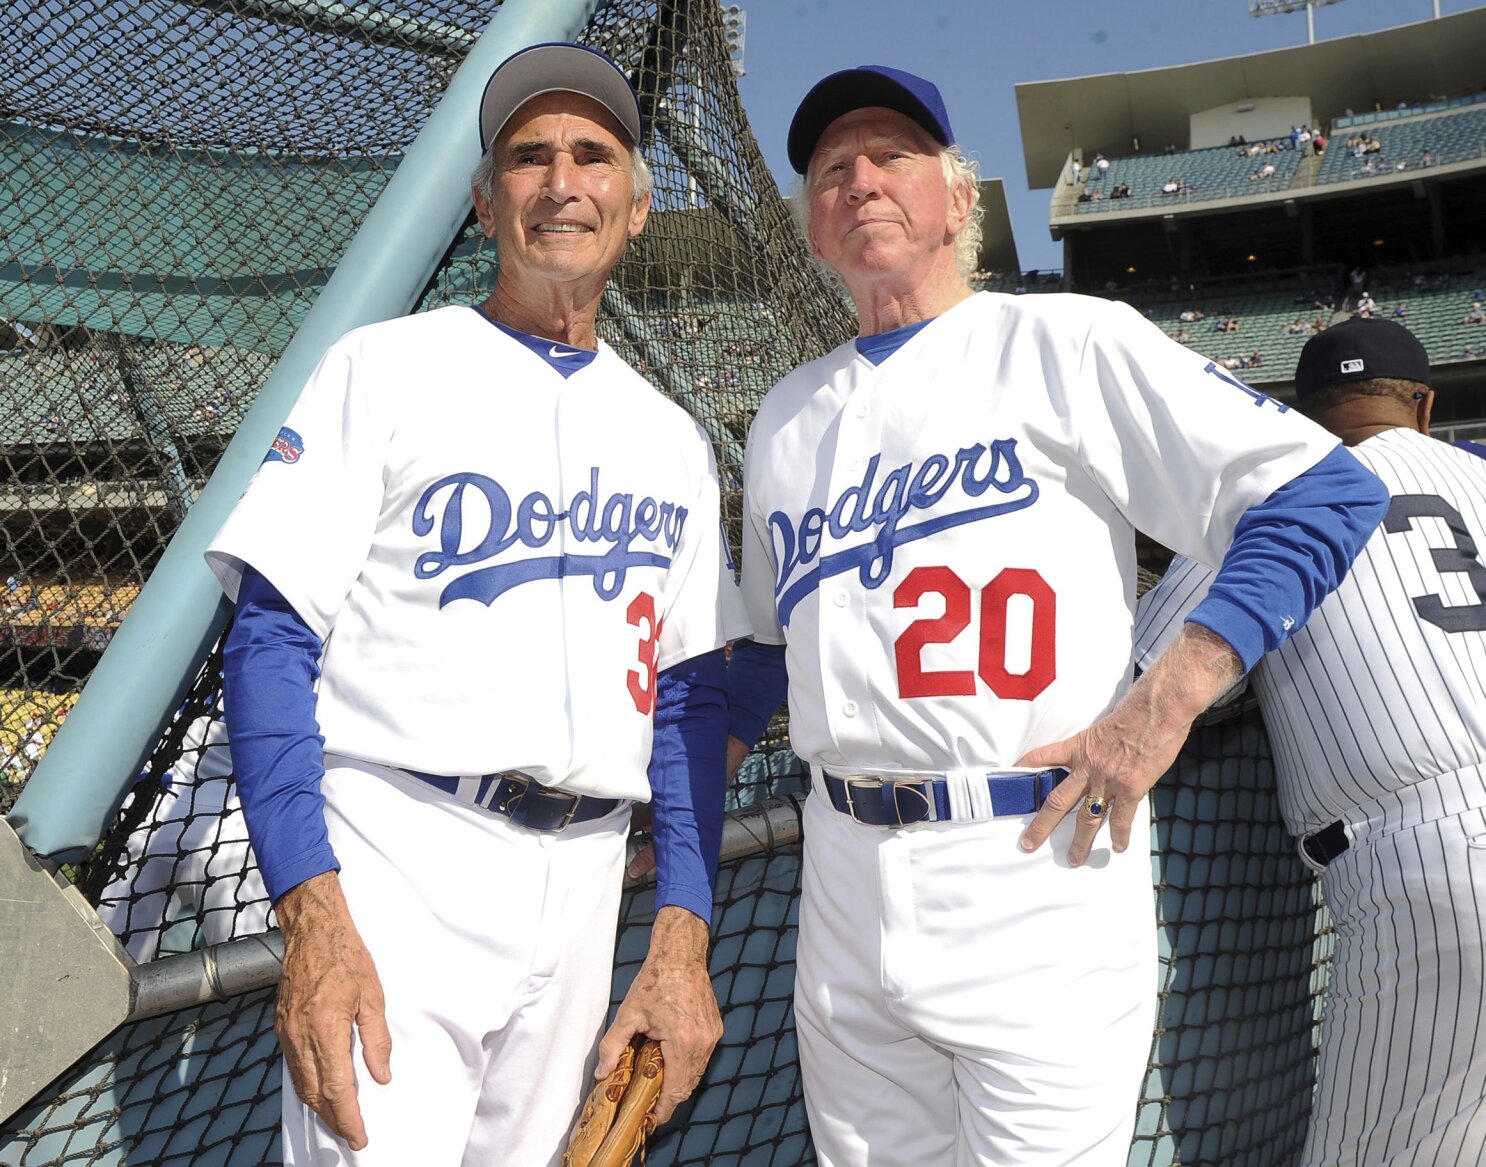 Los Angeles' 'Brooklyn Dodgers' Uniform and the Top 20 MLB